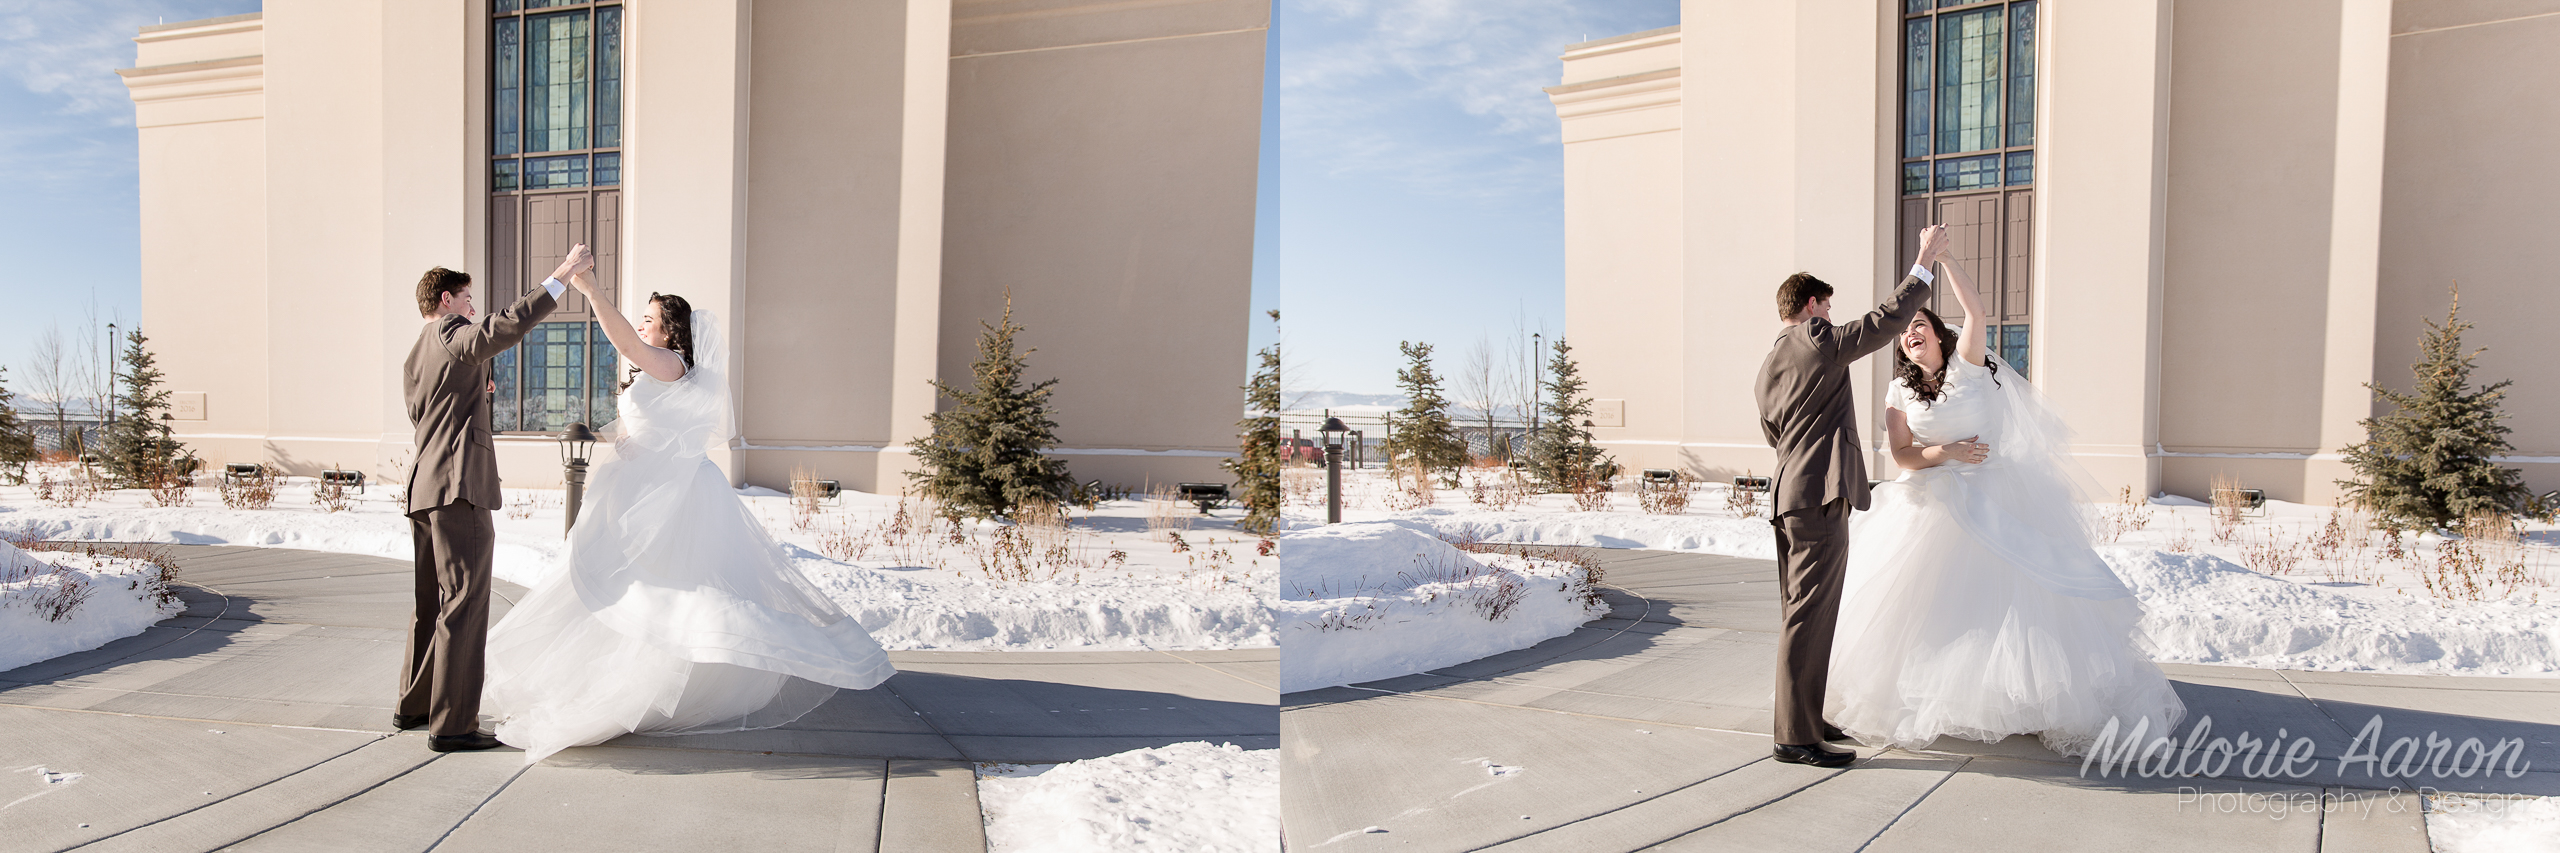 MalorieAaron, Photography, StarValley, Wyoming, LDS, Temple, wedding, winter, fun_wedding_pictures